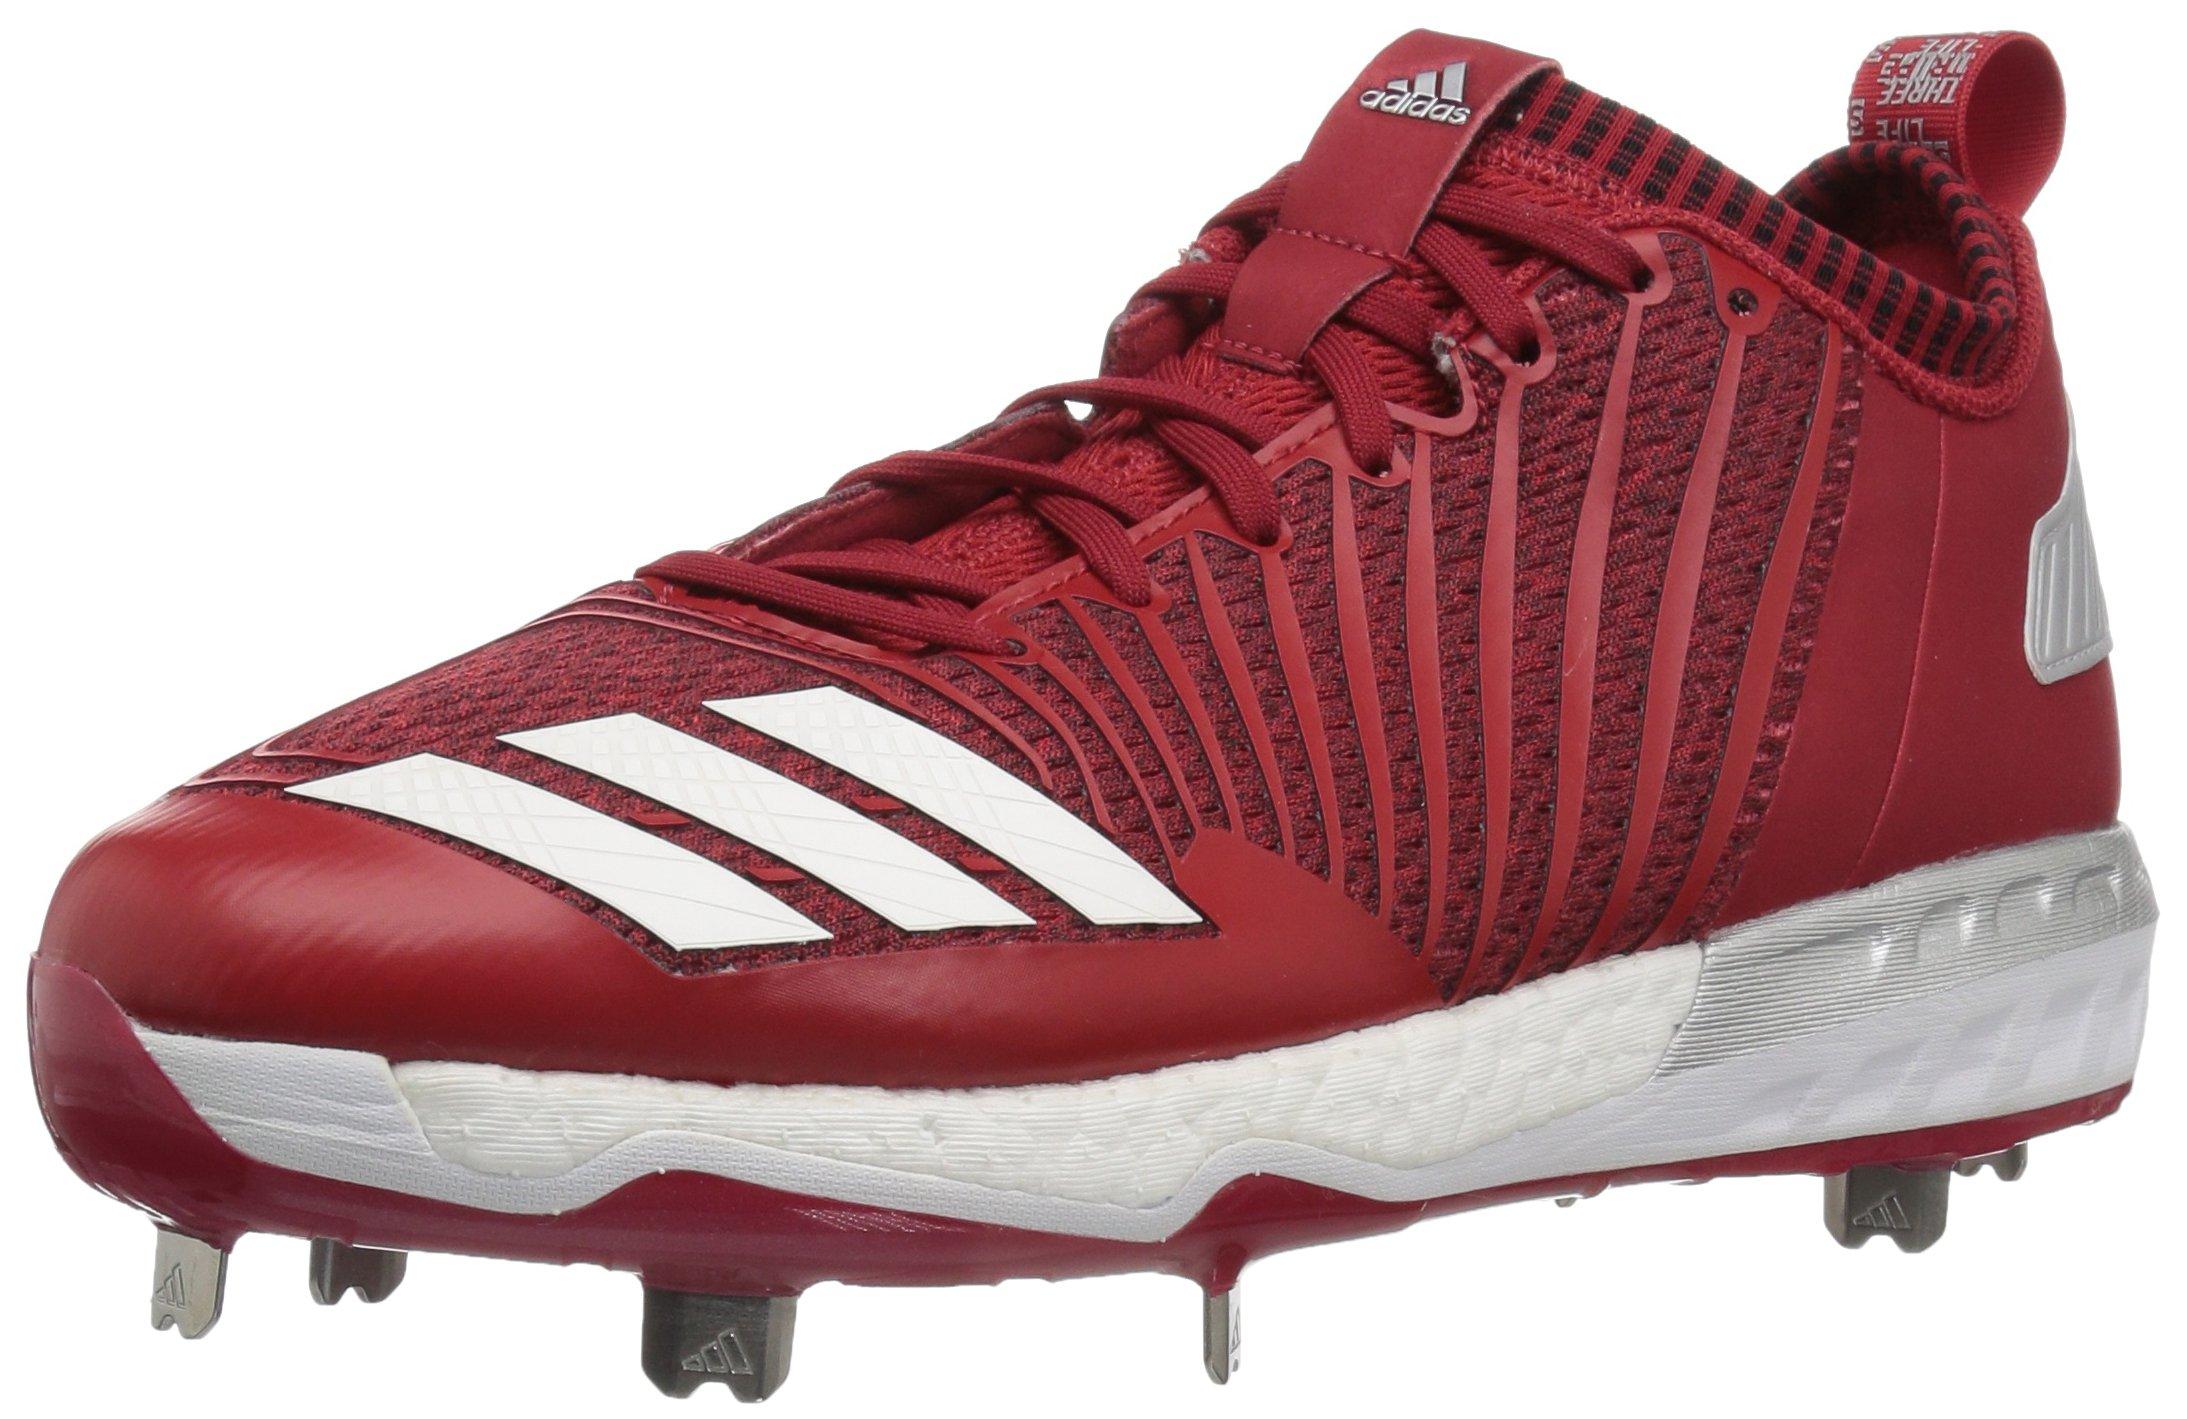 adidas Freak X Carbon Mid Baseball Shoe in Red for Men - Lyst